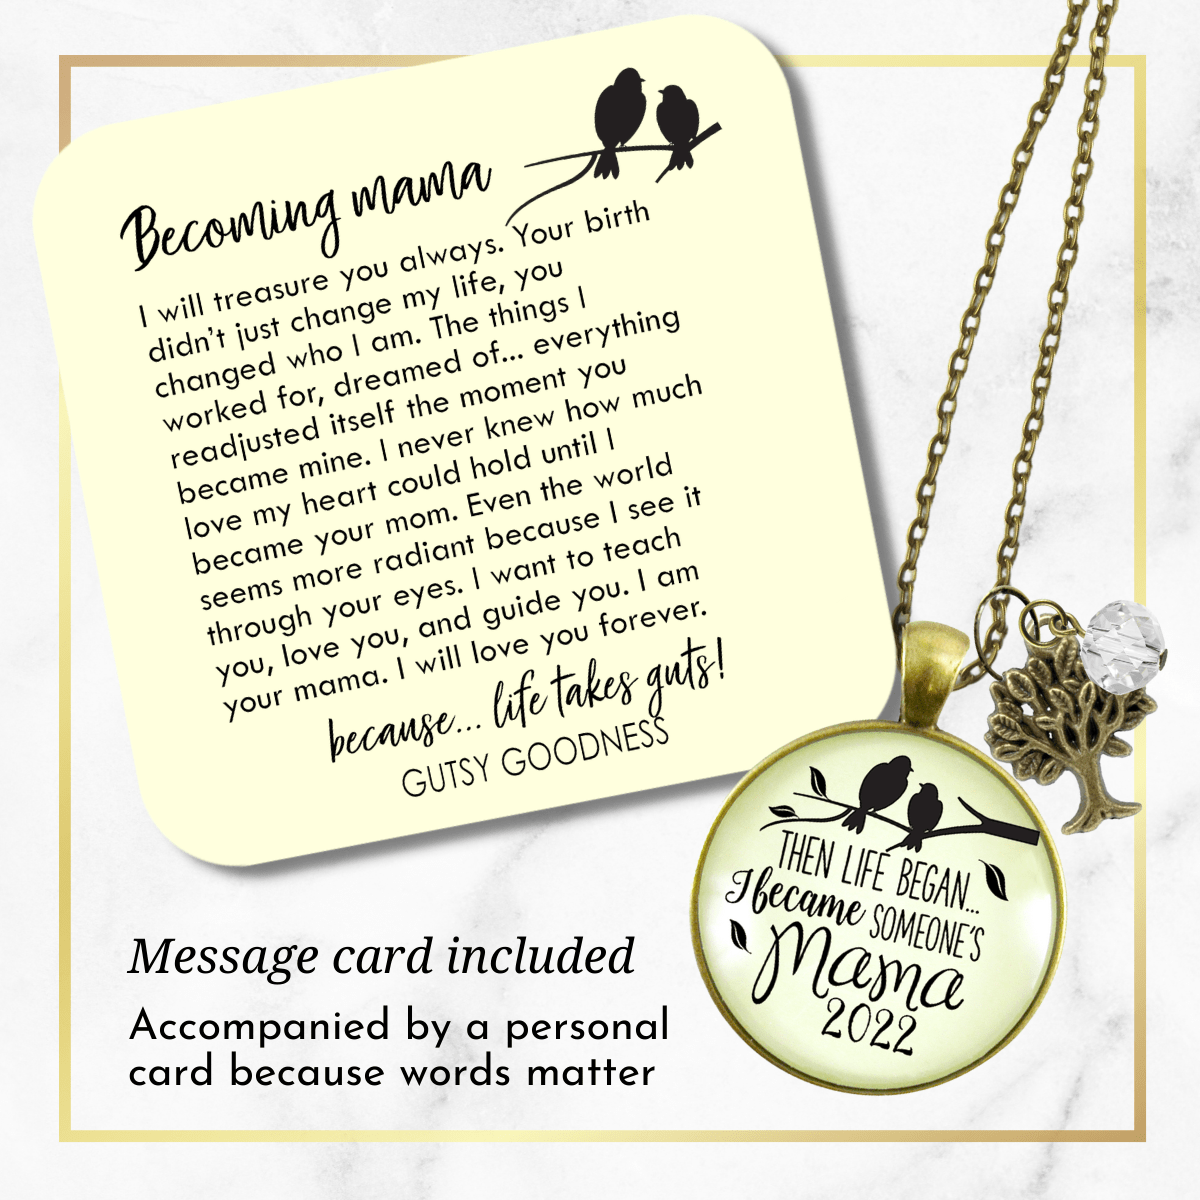 New Mom Necklace Then Life Began Mama 2022, 2021, etc Meaningful Mom Jewelry Gift - Gutsy Goodness